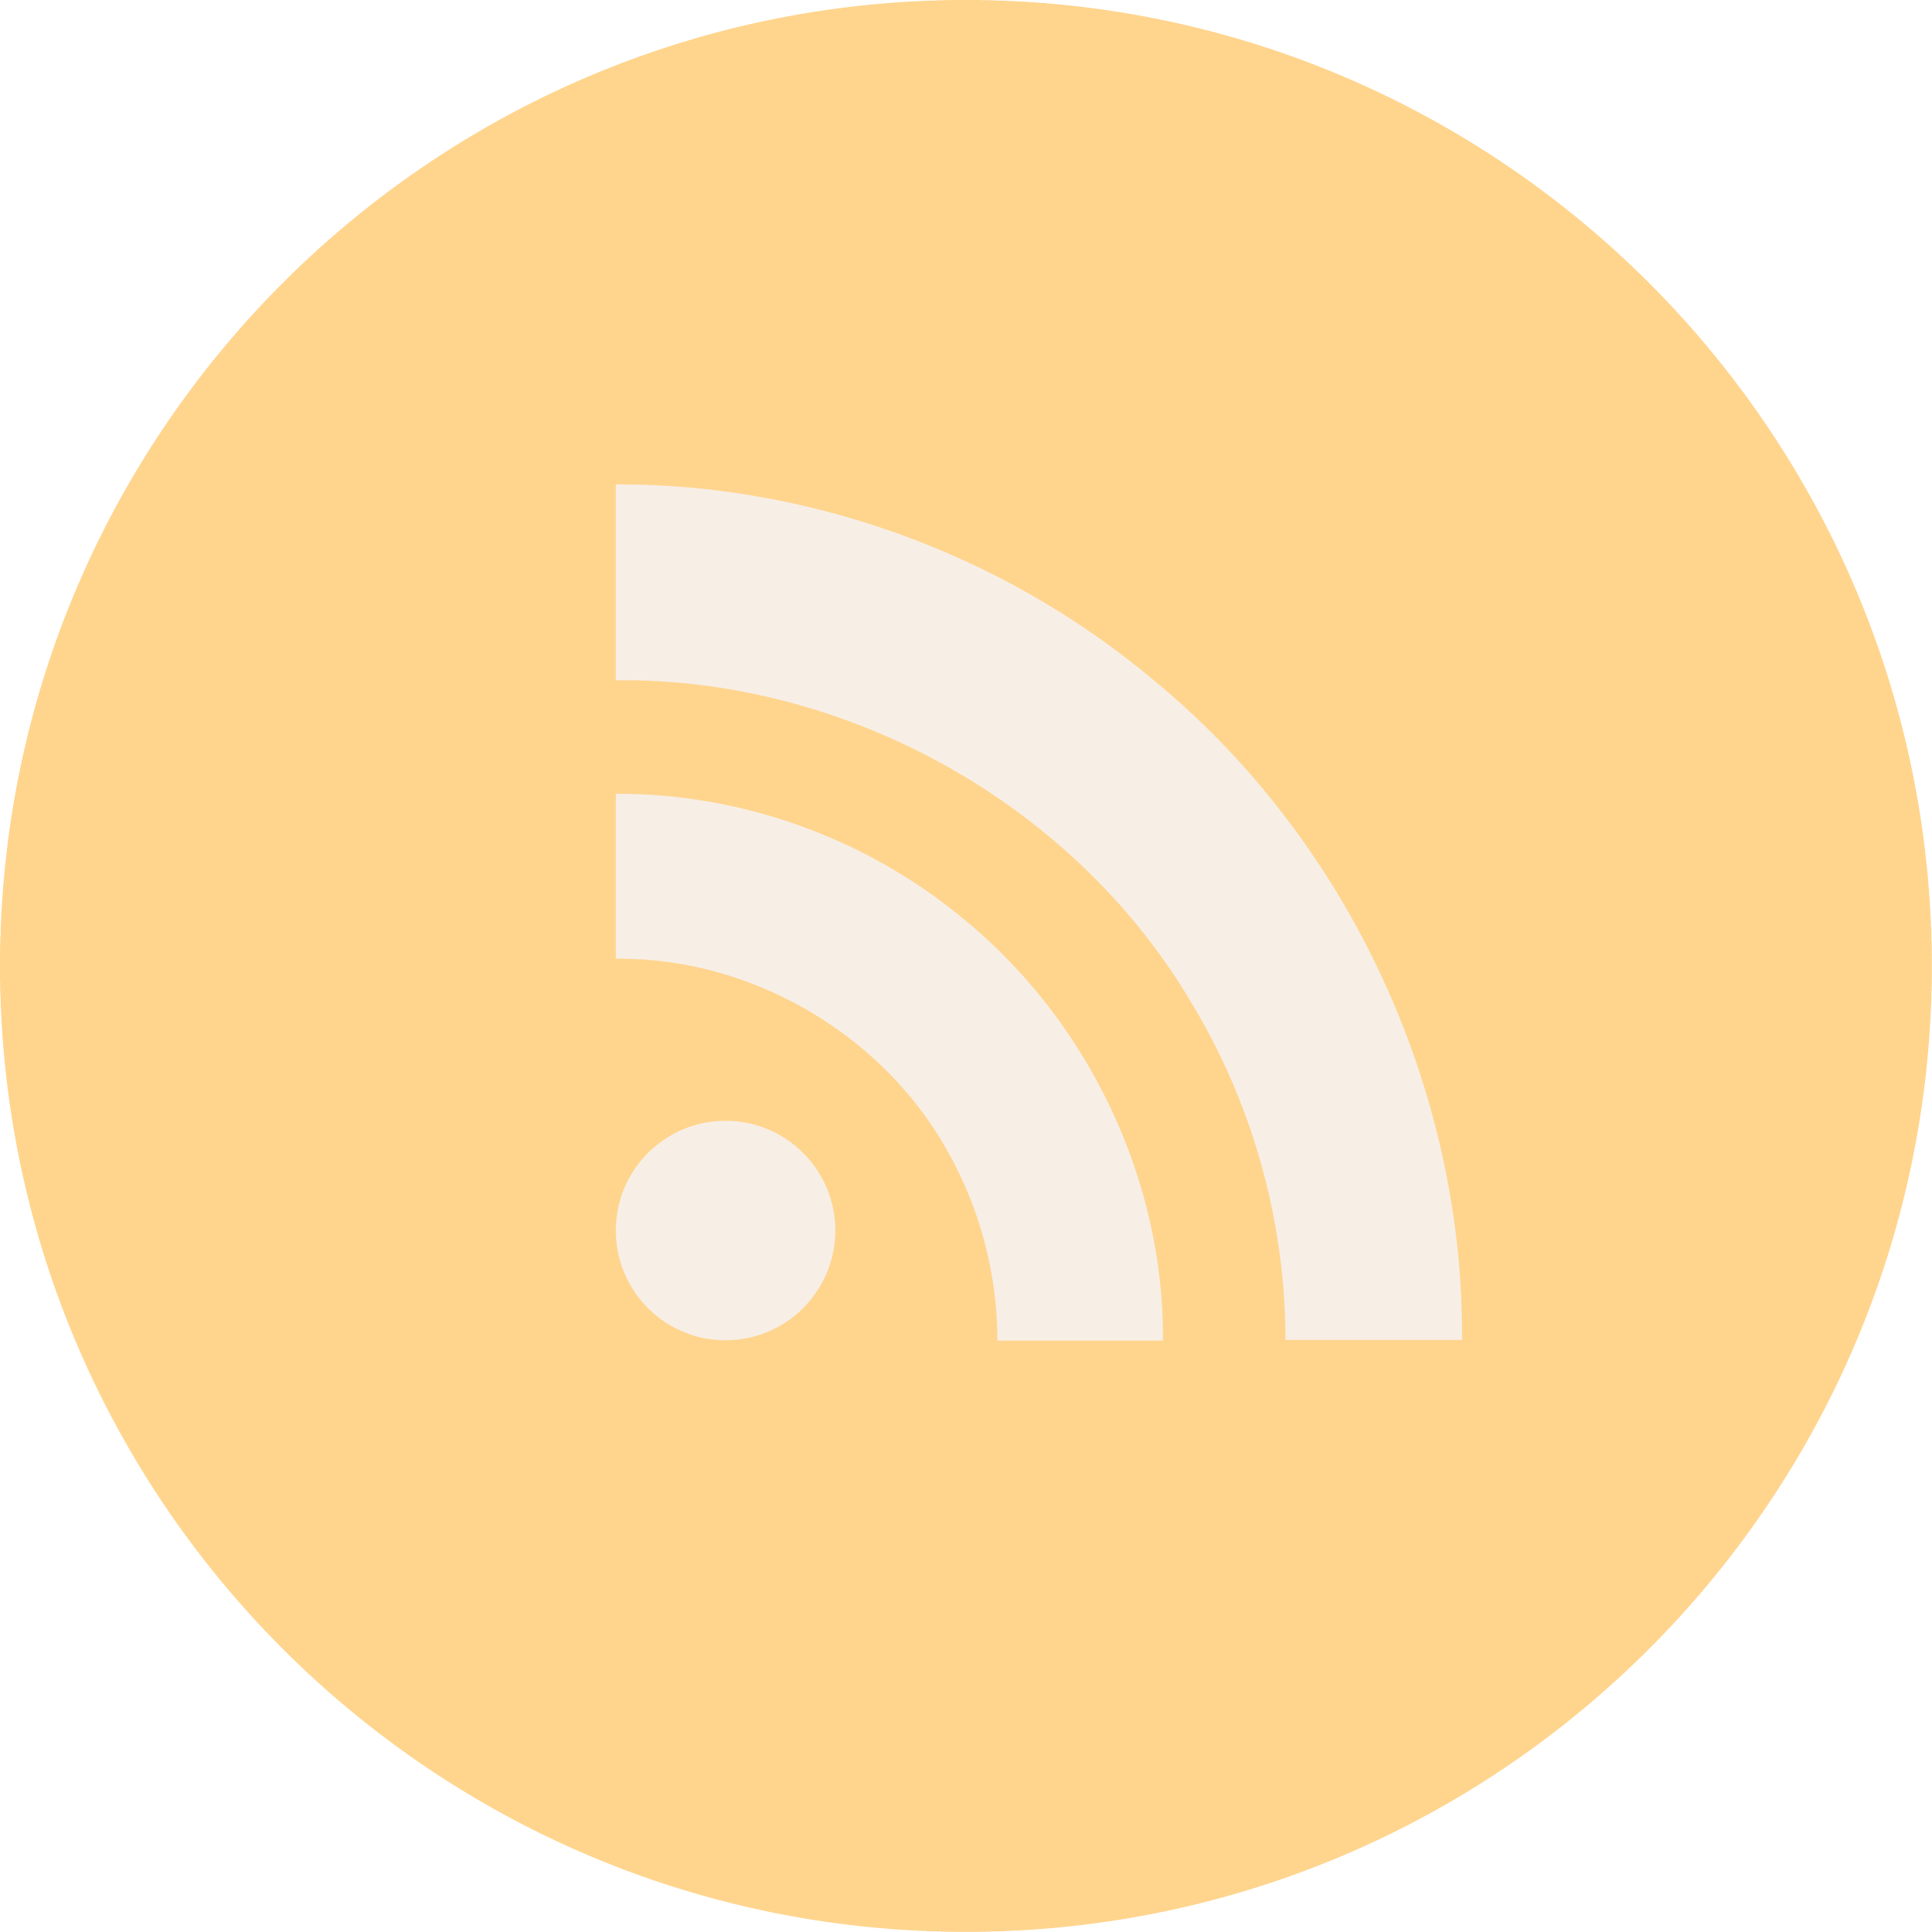 Podcast App Logos_RSS.png